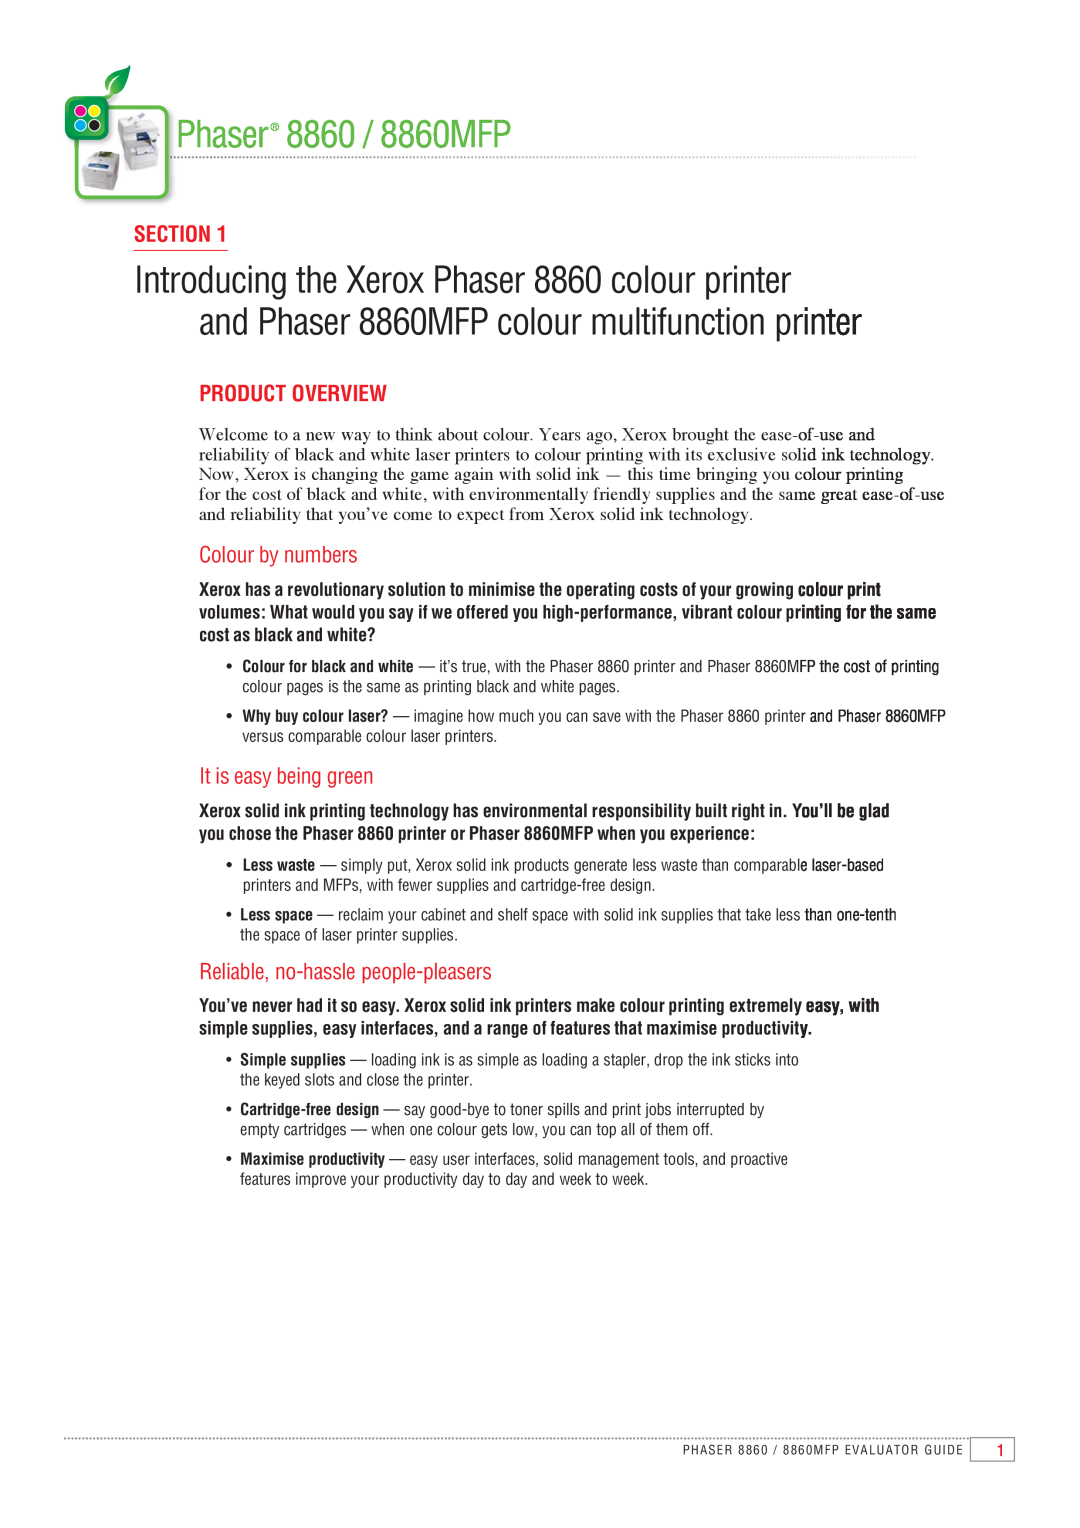 Xerox manual Phaser 8860 / 8860MFP, Section, Product Overview, Colour by numbers, It is easy being green 